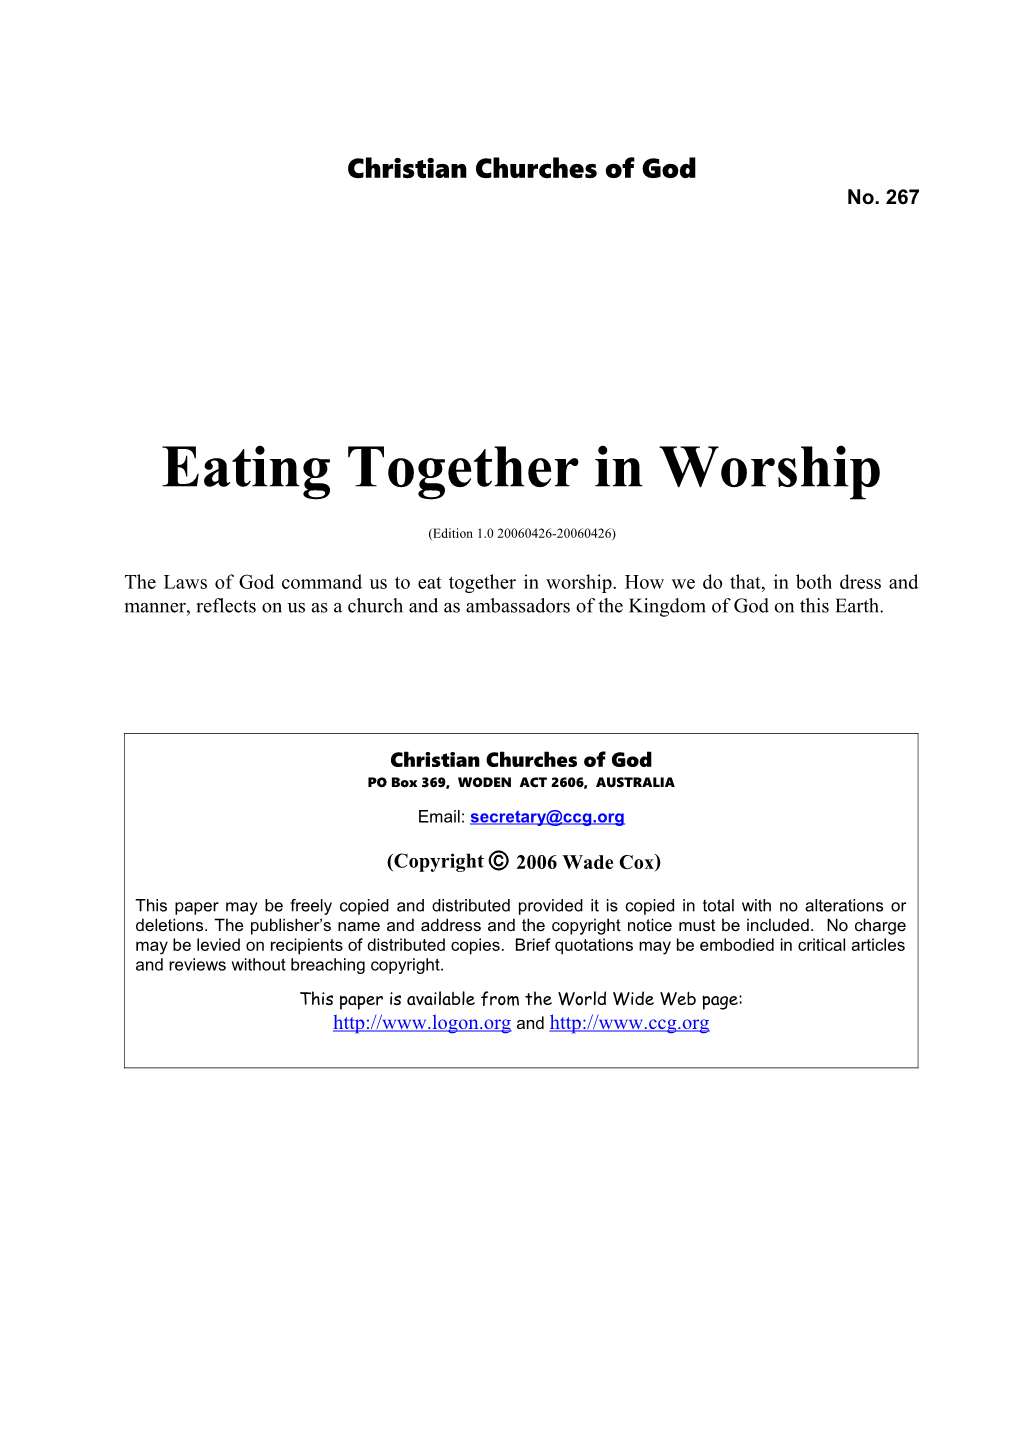 Eating Together in Worship (No. 267)